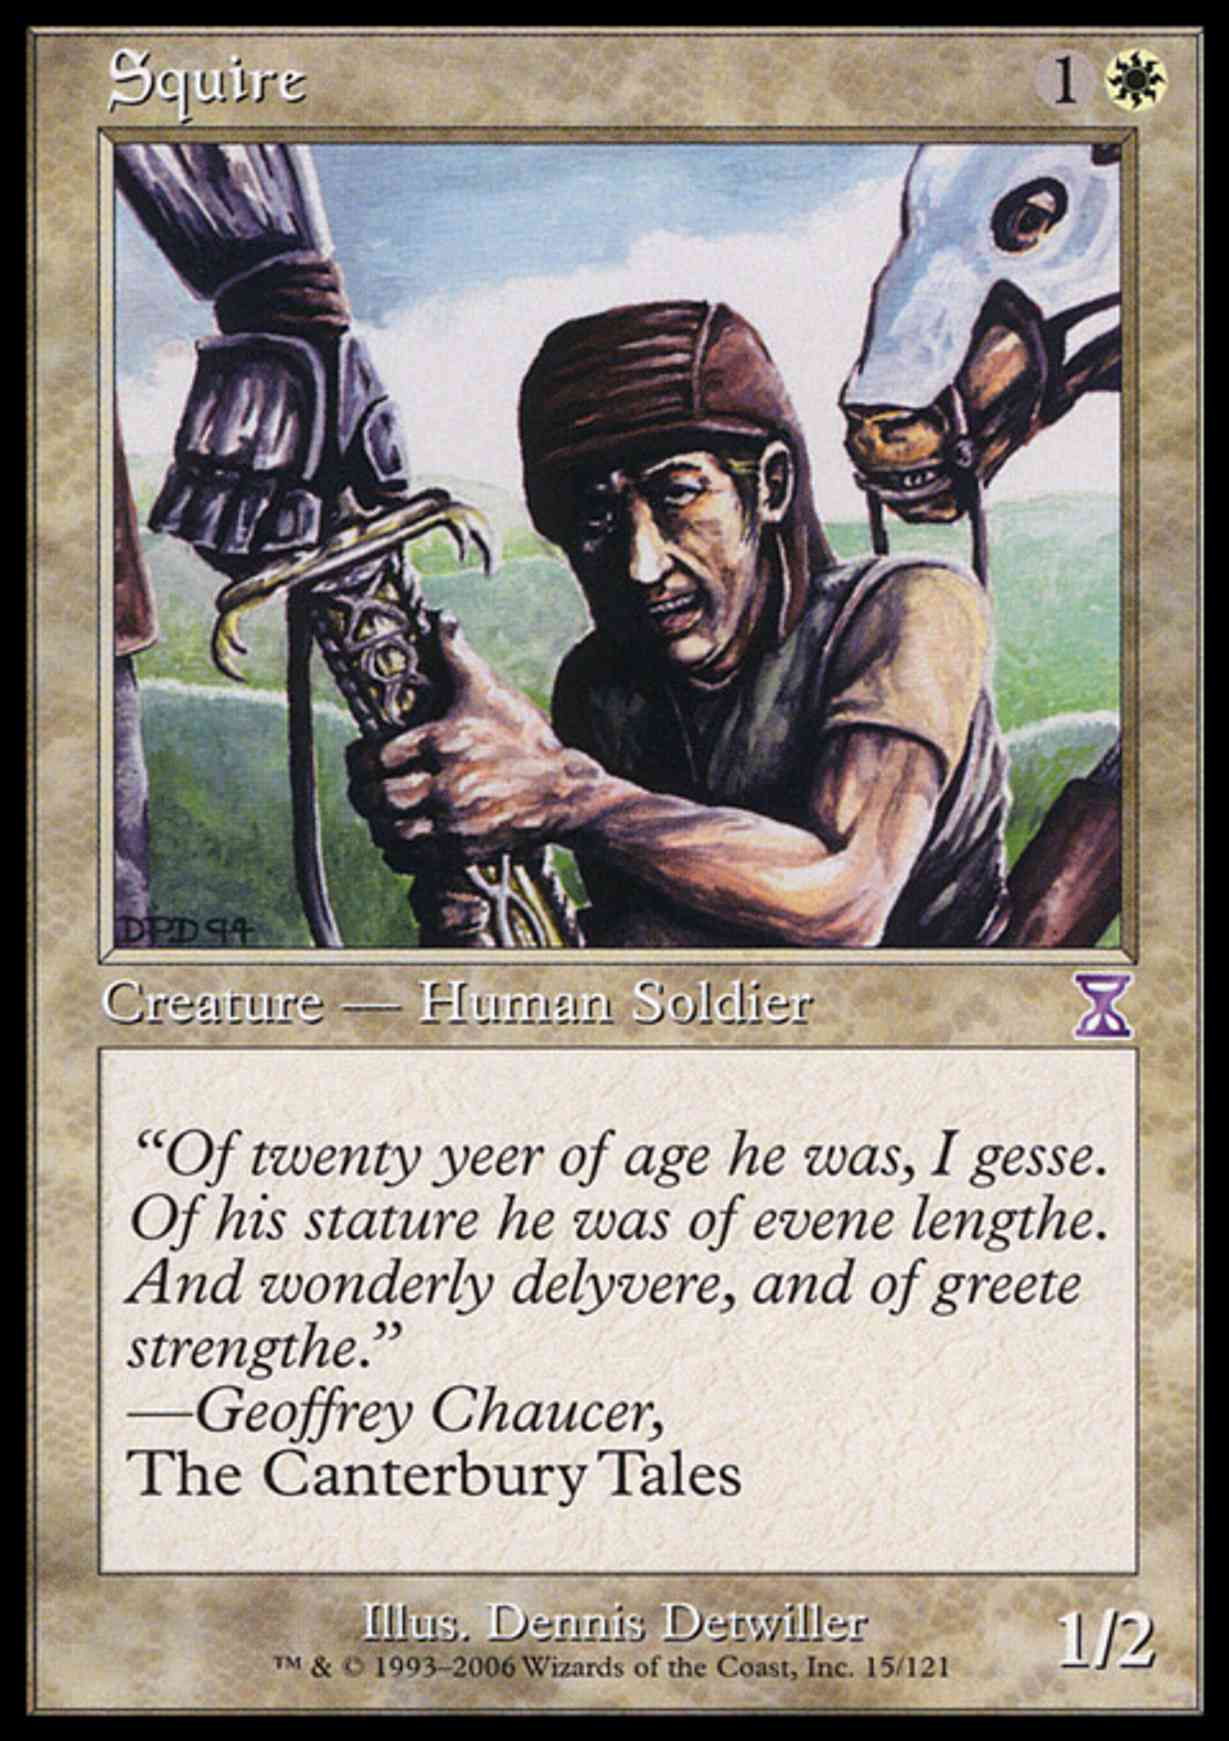 Squire magic card front